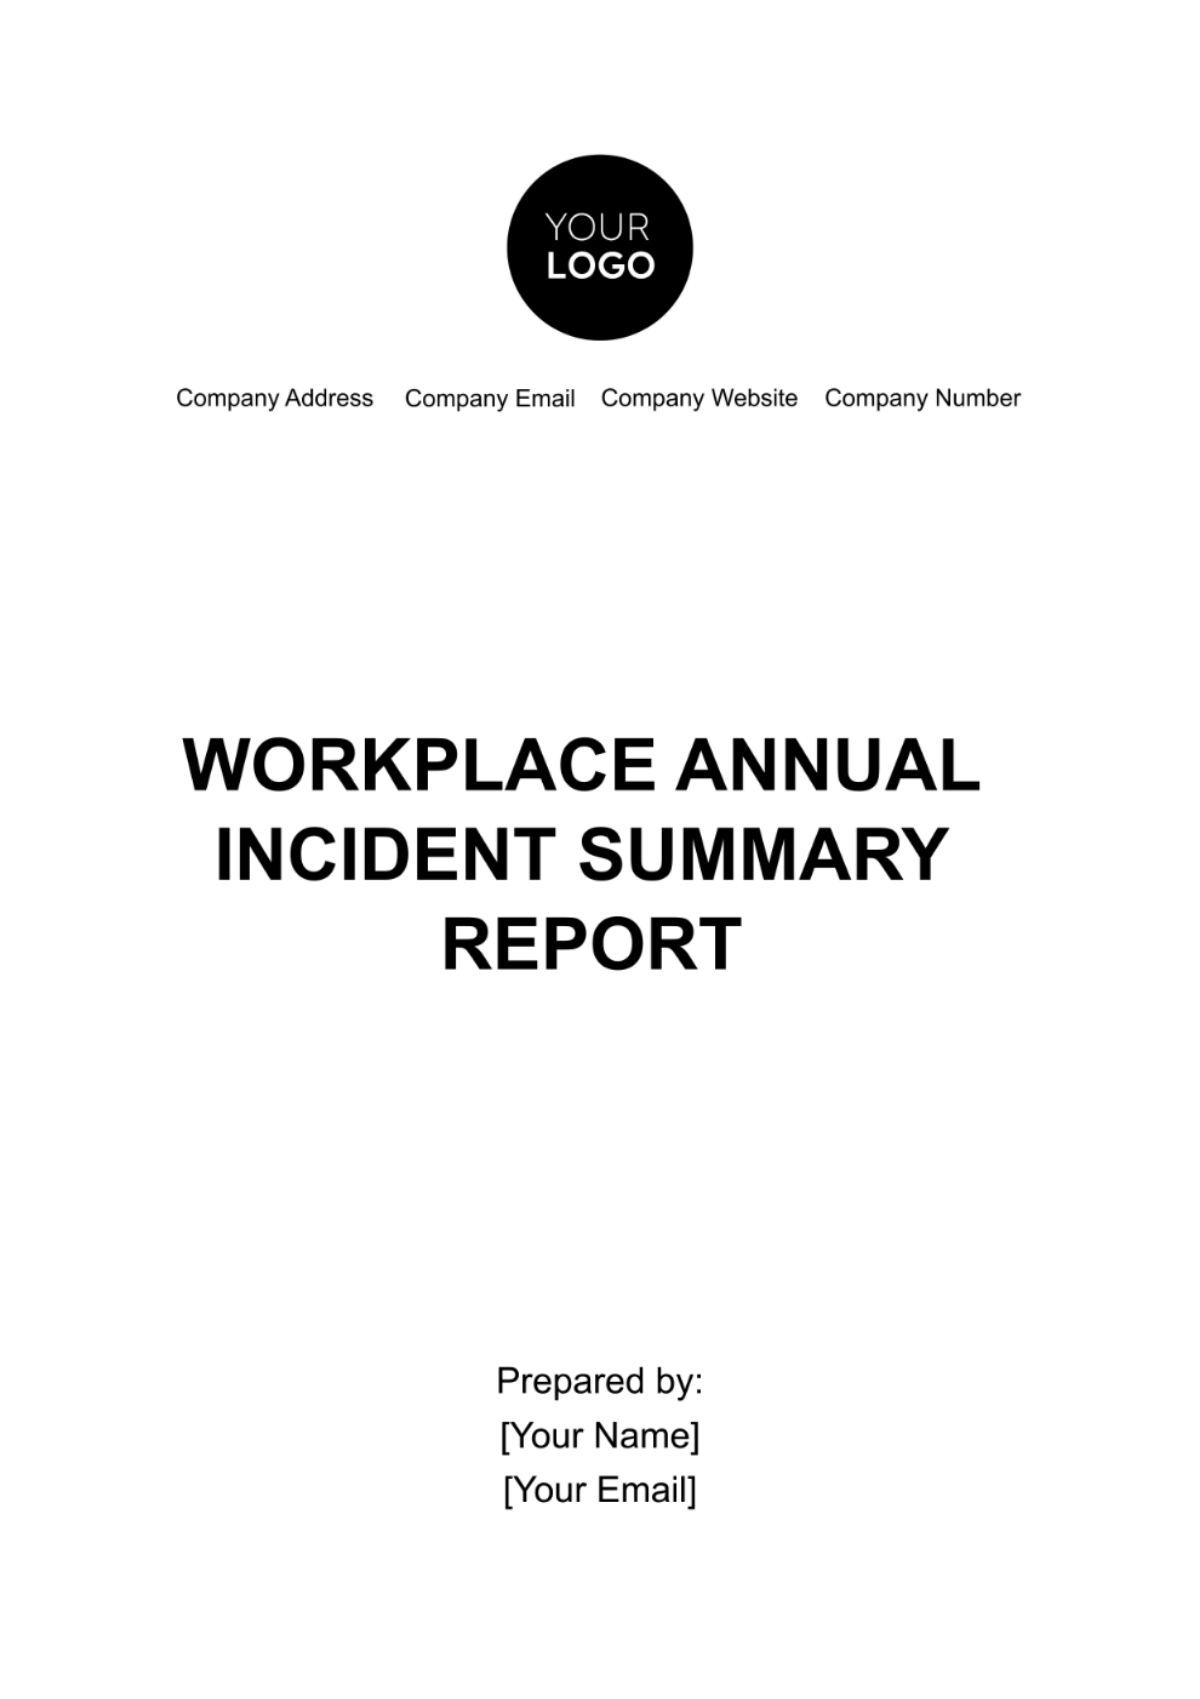 Workplace Annual Incident Summary Report Template